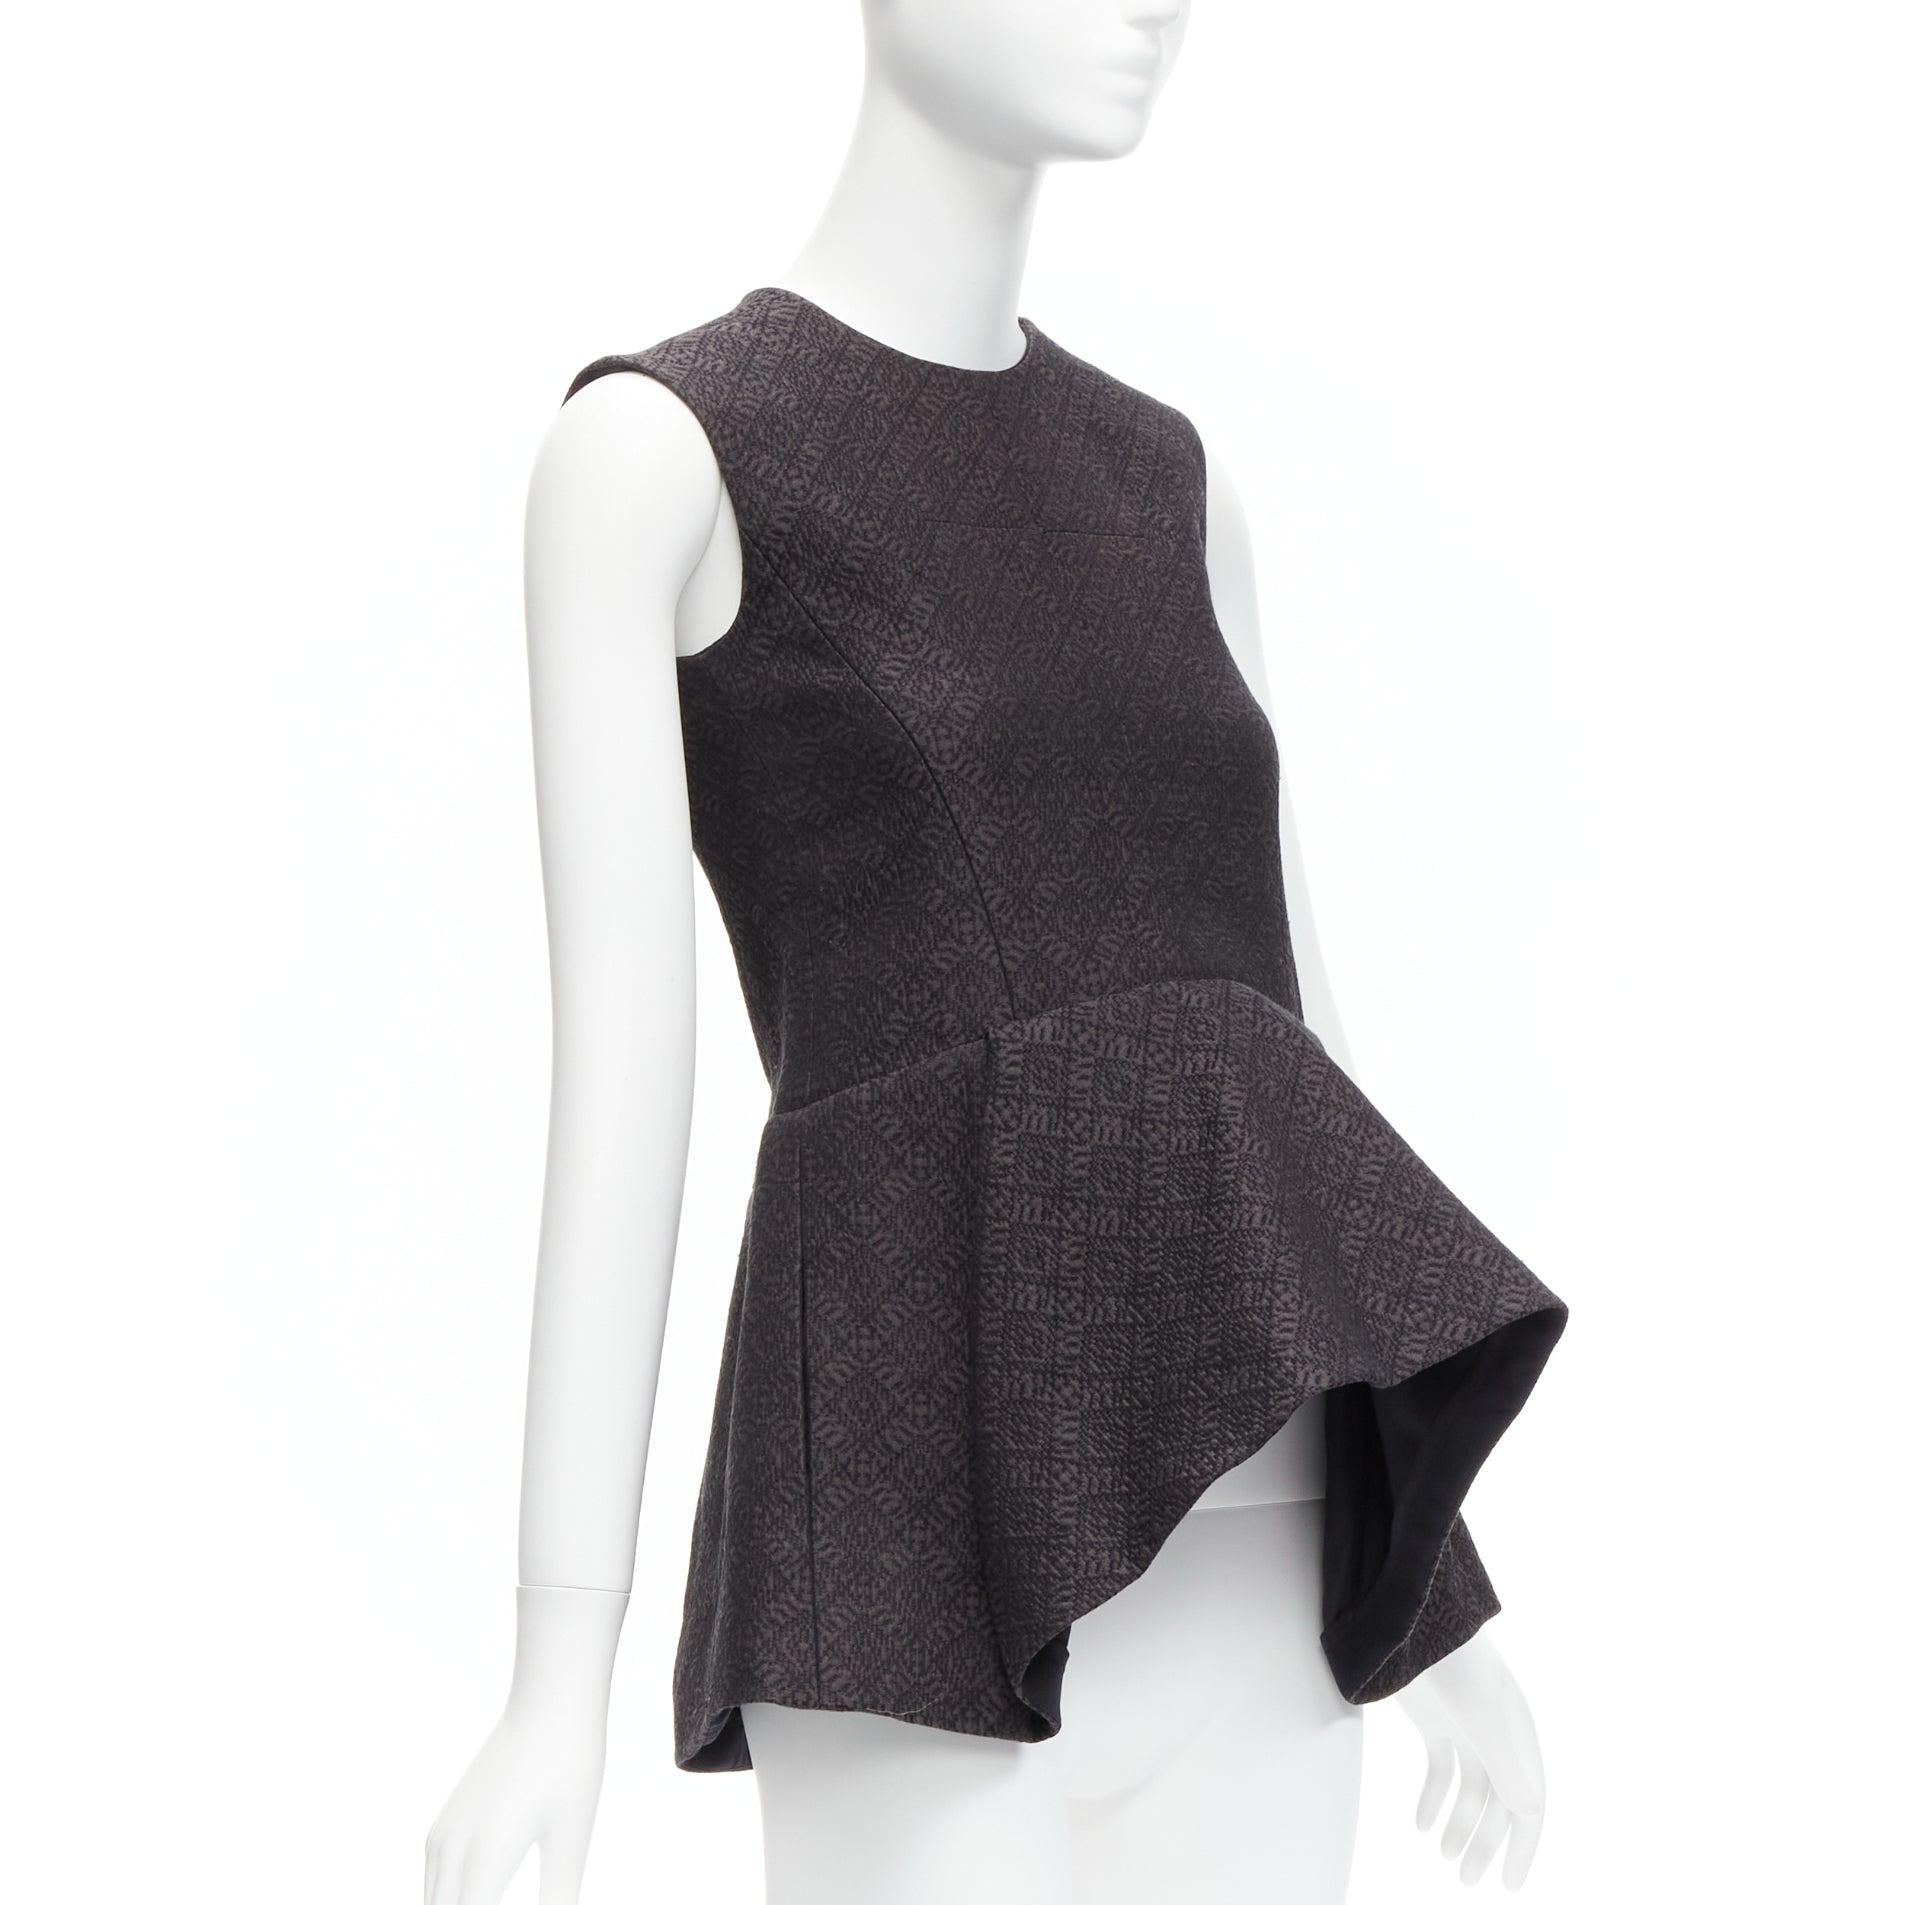 OLD CELINE Phoebe Philo black cotton jacquard waterfall peplum top FR34 XS
Reference: MEKK/A00017
Brand: Celine
Designer: Phoebe Philo
Material: Cotton, Blend
Color: Black
Pattern: Abstract
Closure: Zip
Lining: Black Fabric
Extra Details: Back